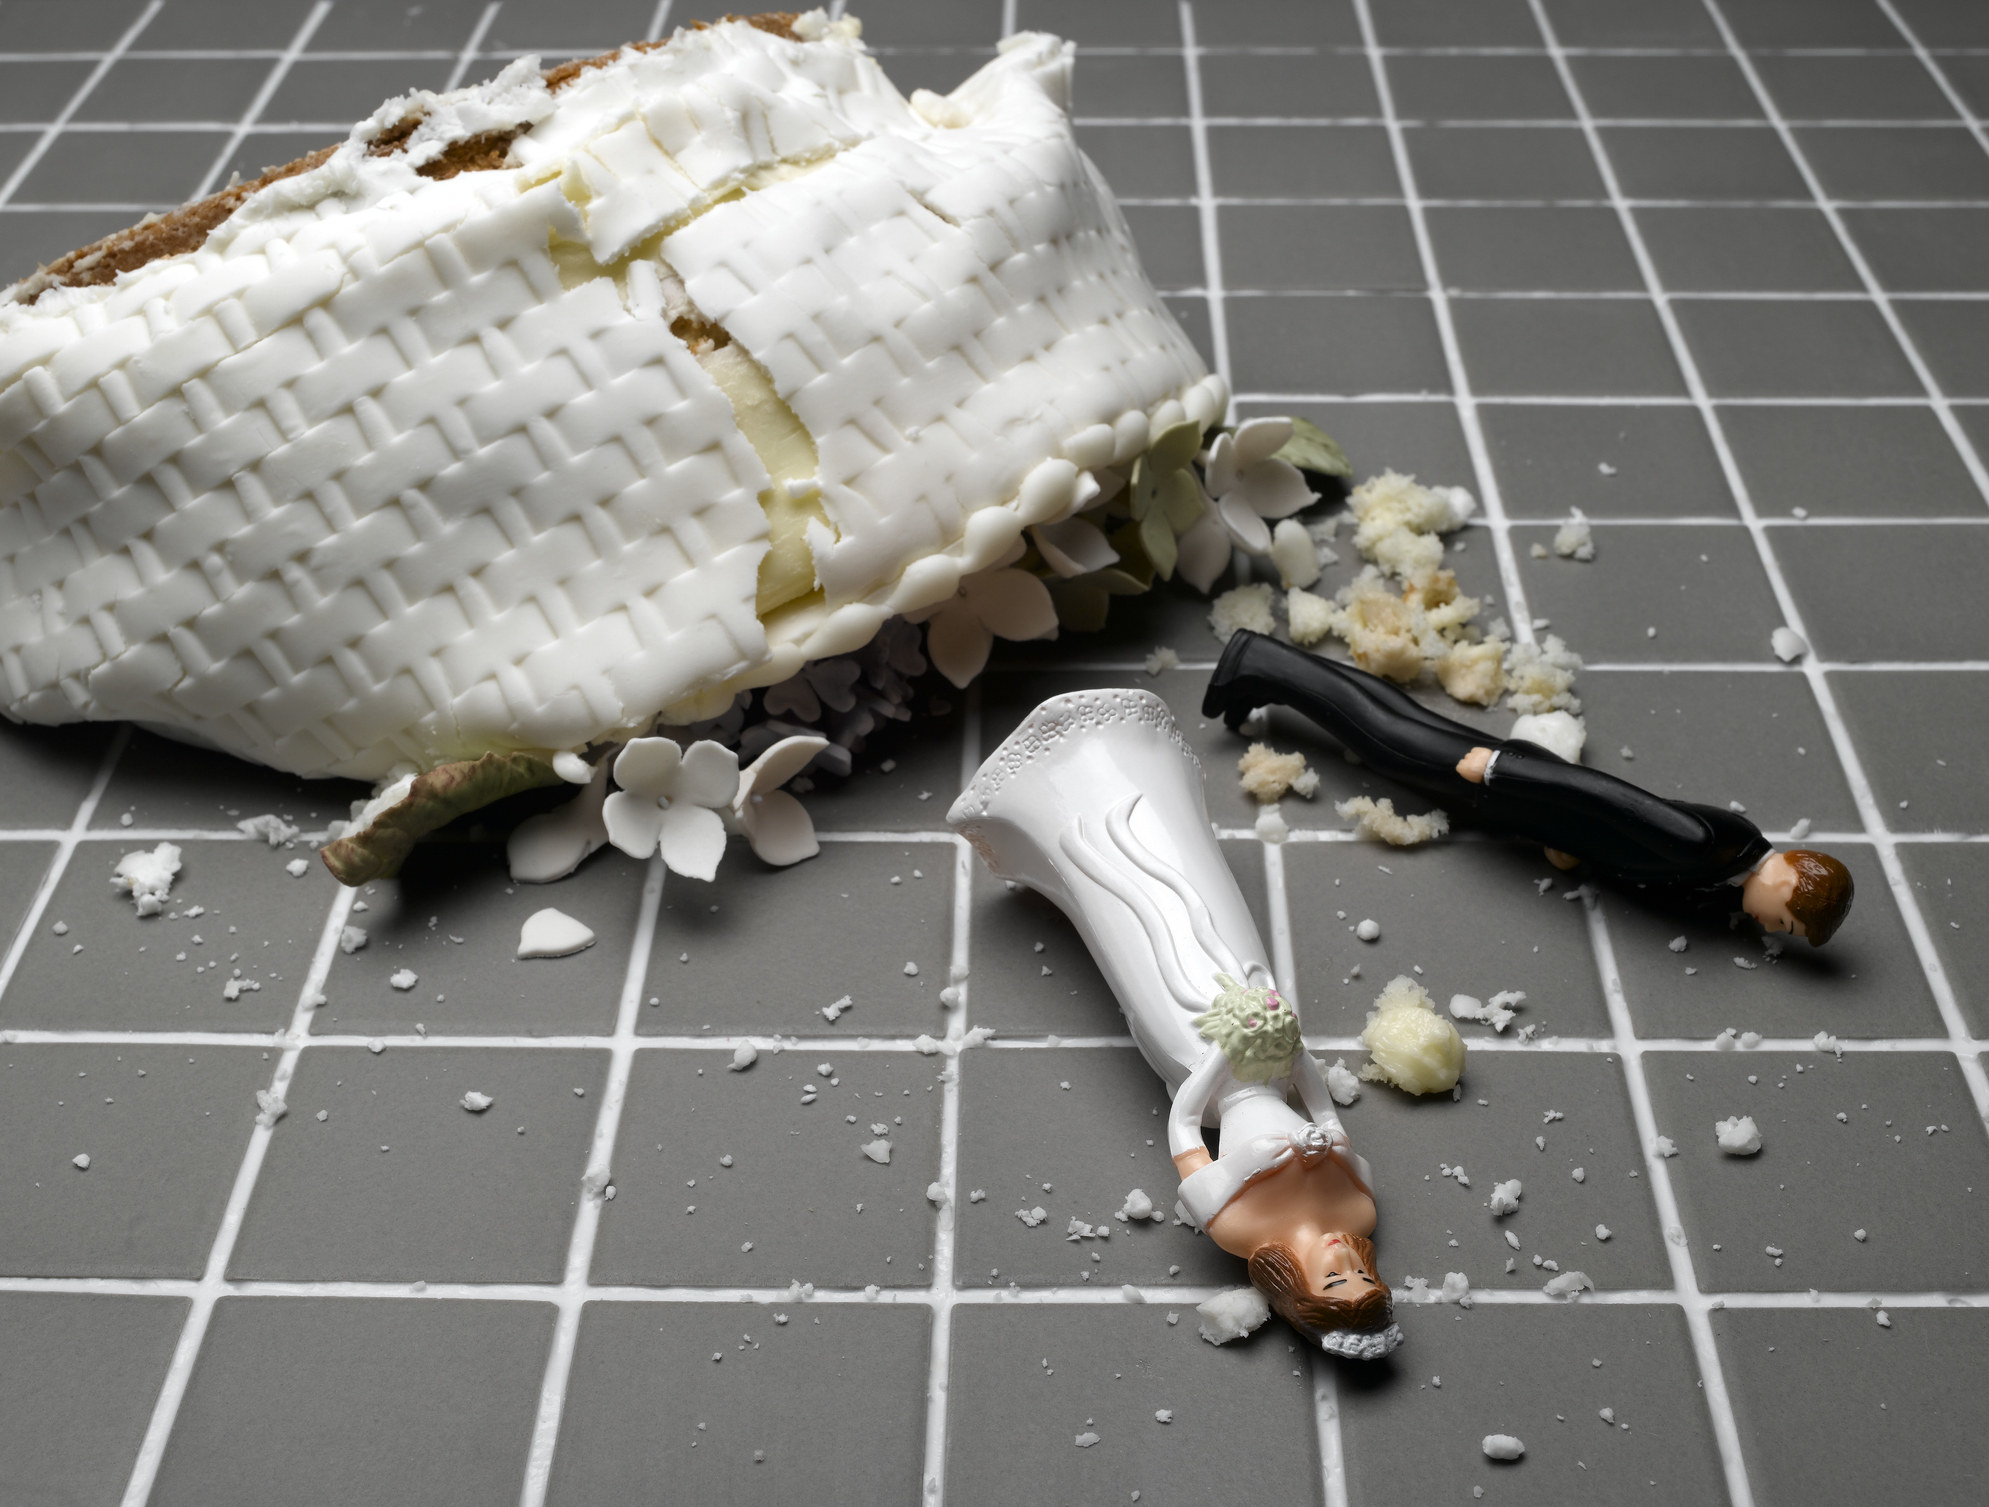 a smashed wedding cake on the floor